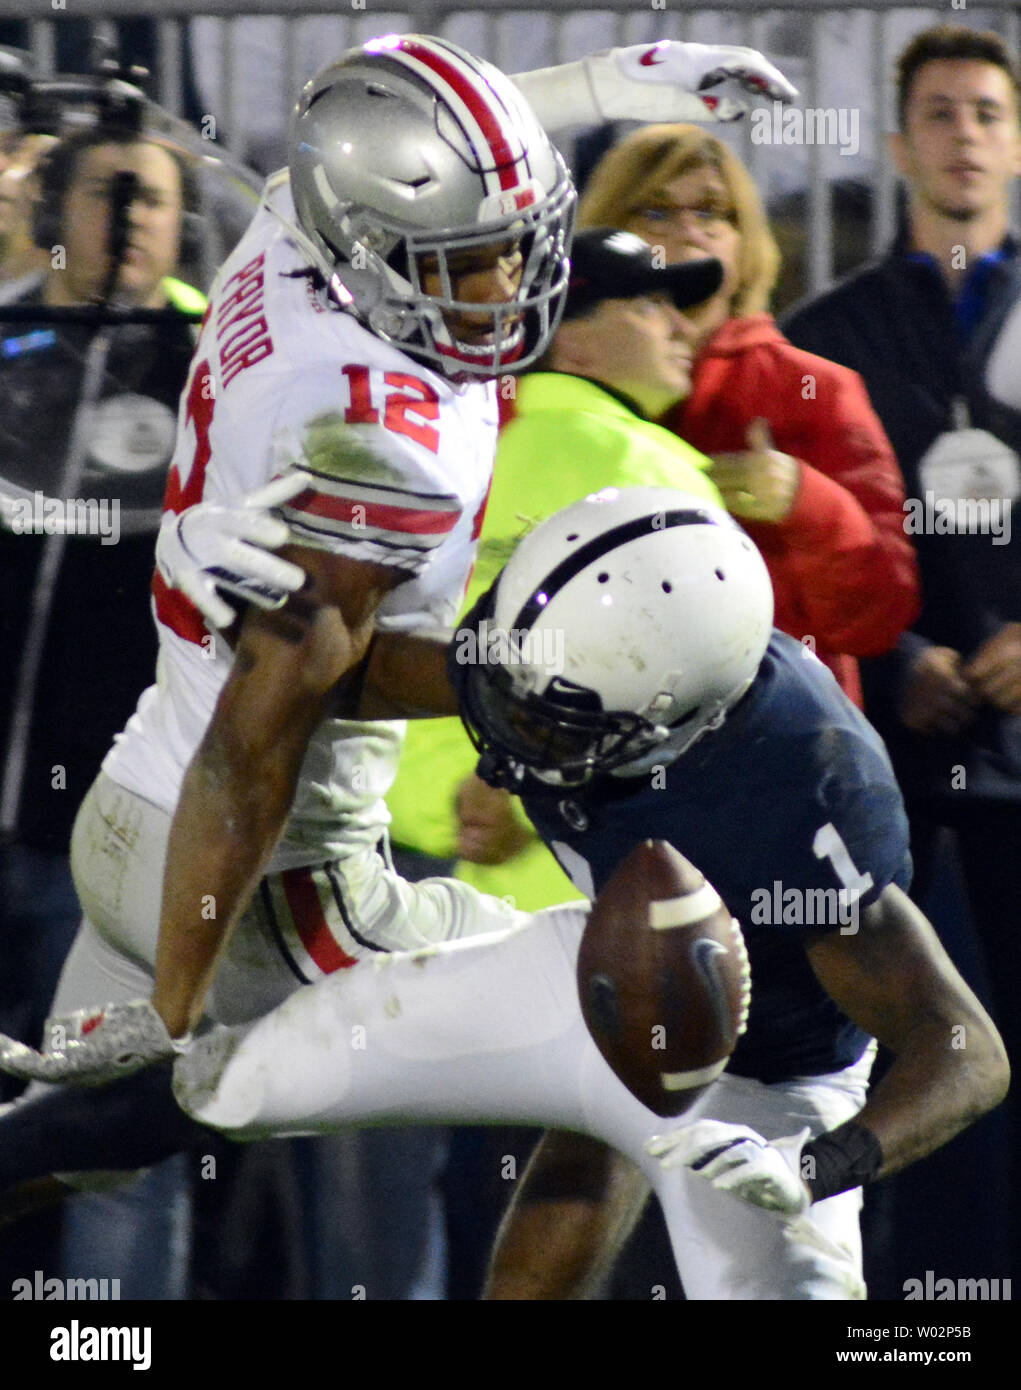 Ohio State Buckeyes safety Isaiah Pryor (12)  receives a defensive interference call as Penn State Nittany Lions wide receiver KJ Hamler (1) falls to the turf in the third quarter of the Ohio State Buckeyes 27-26 victory at Beaver Stadium in State College , Pennsylvania on September 29, 2018. Photo by Archie Carpenter/UPI Stock Photo